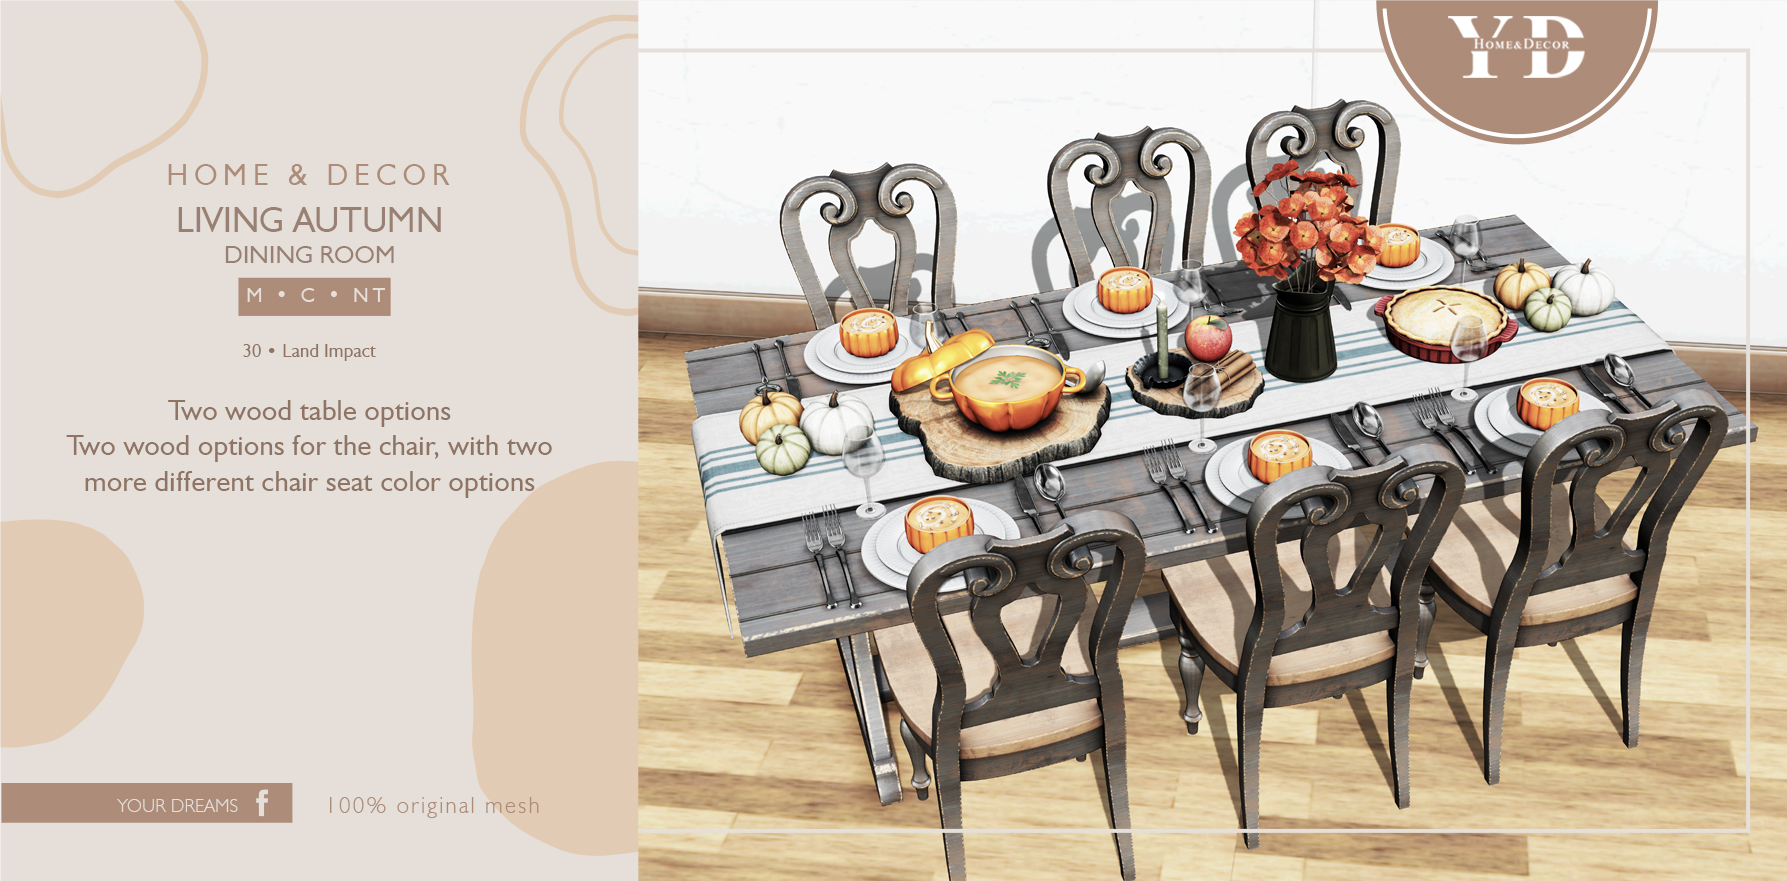 Your Dreams – Living Autumn Dining Room